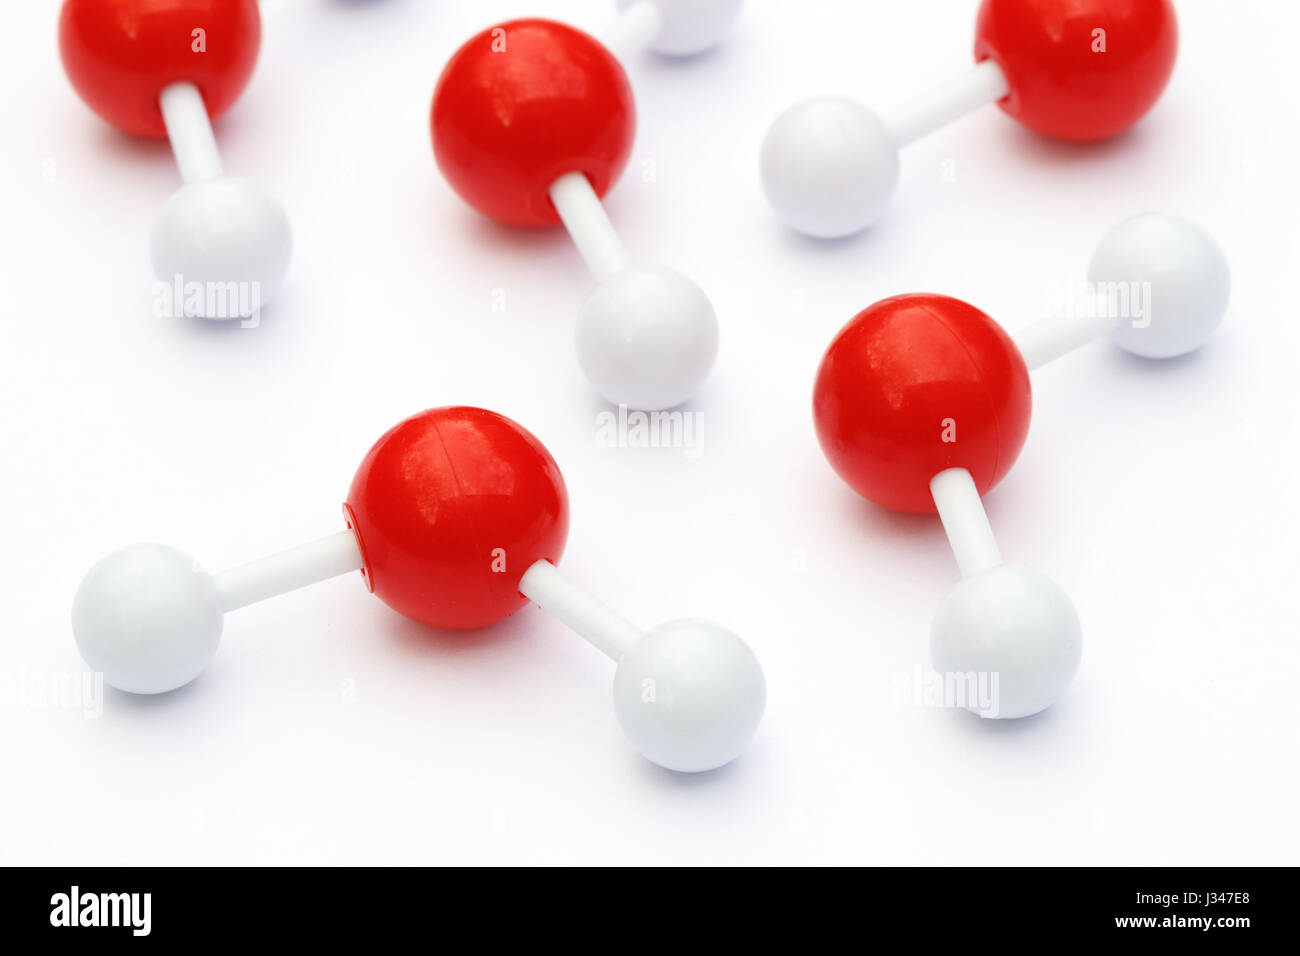 Plastic ball-and-stick models of water molecules on a white background. Water molecules consist of two hydrogen atoms connected to an oxygen atom. Stock Photo